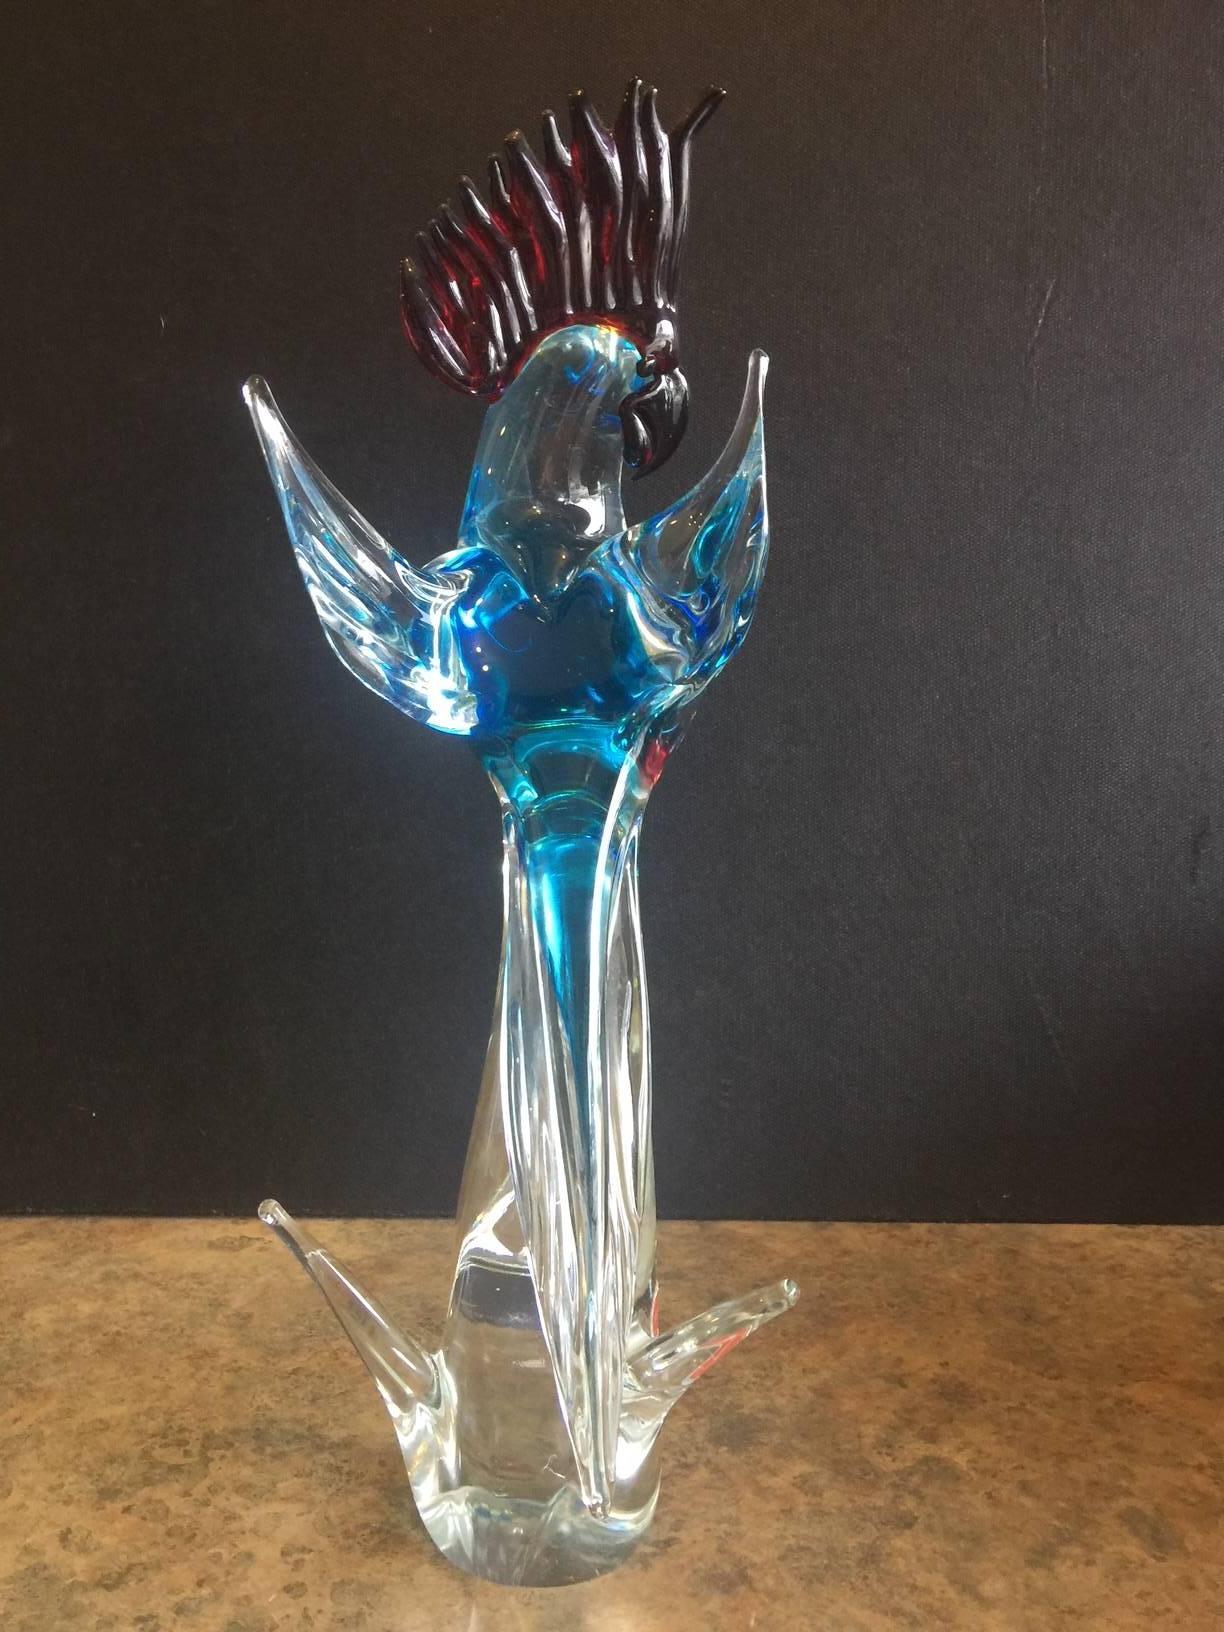 A very stylish 15" high Italian Art Glass cockatoo or bird sculpture by Murano Glass, circa 1960s. Great color and clarity in this vintage piece which includes original Murano foil label.